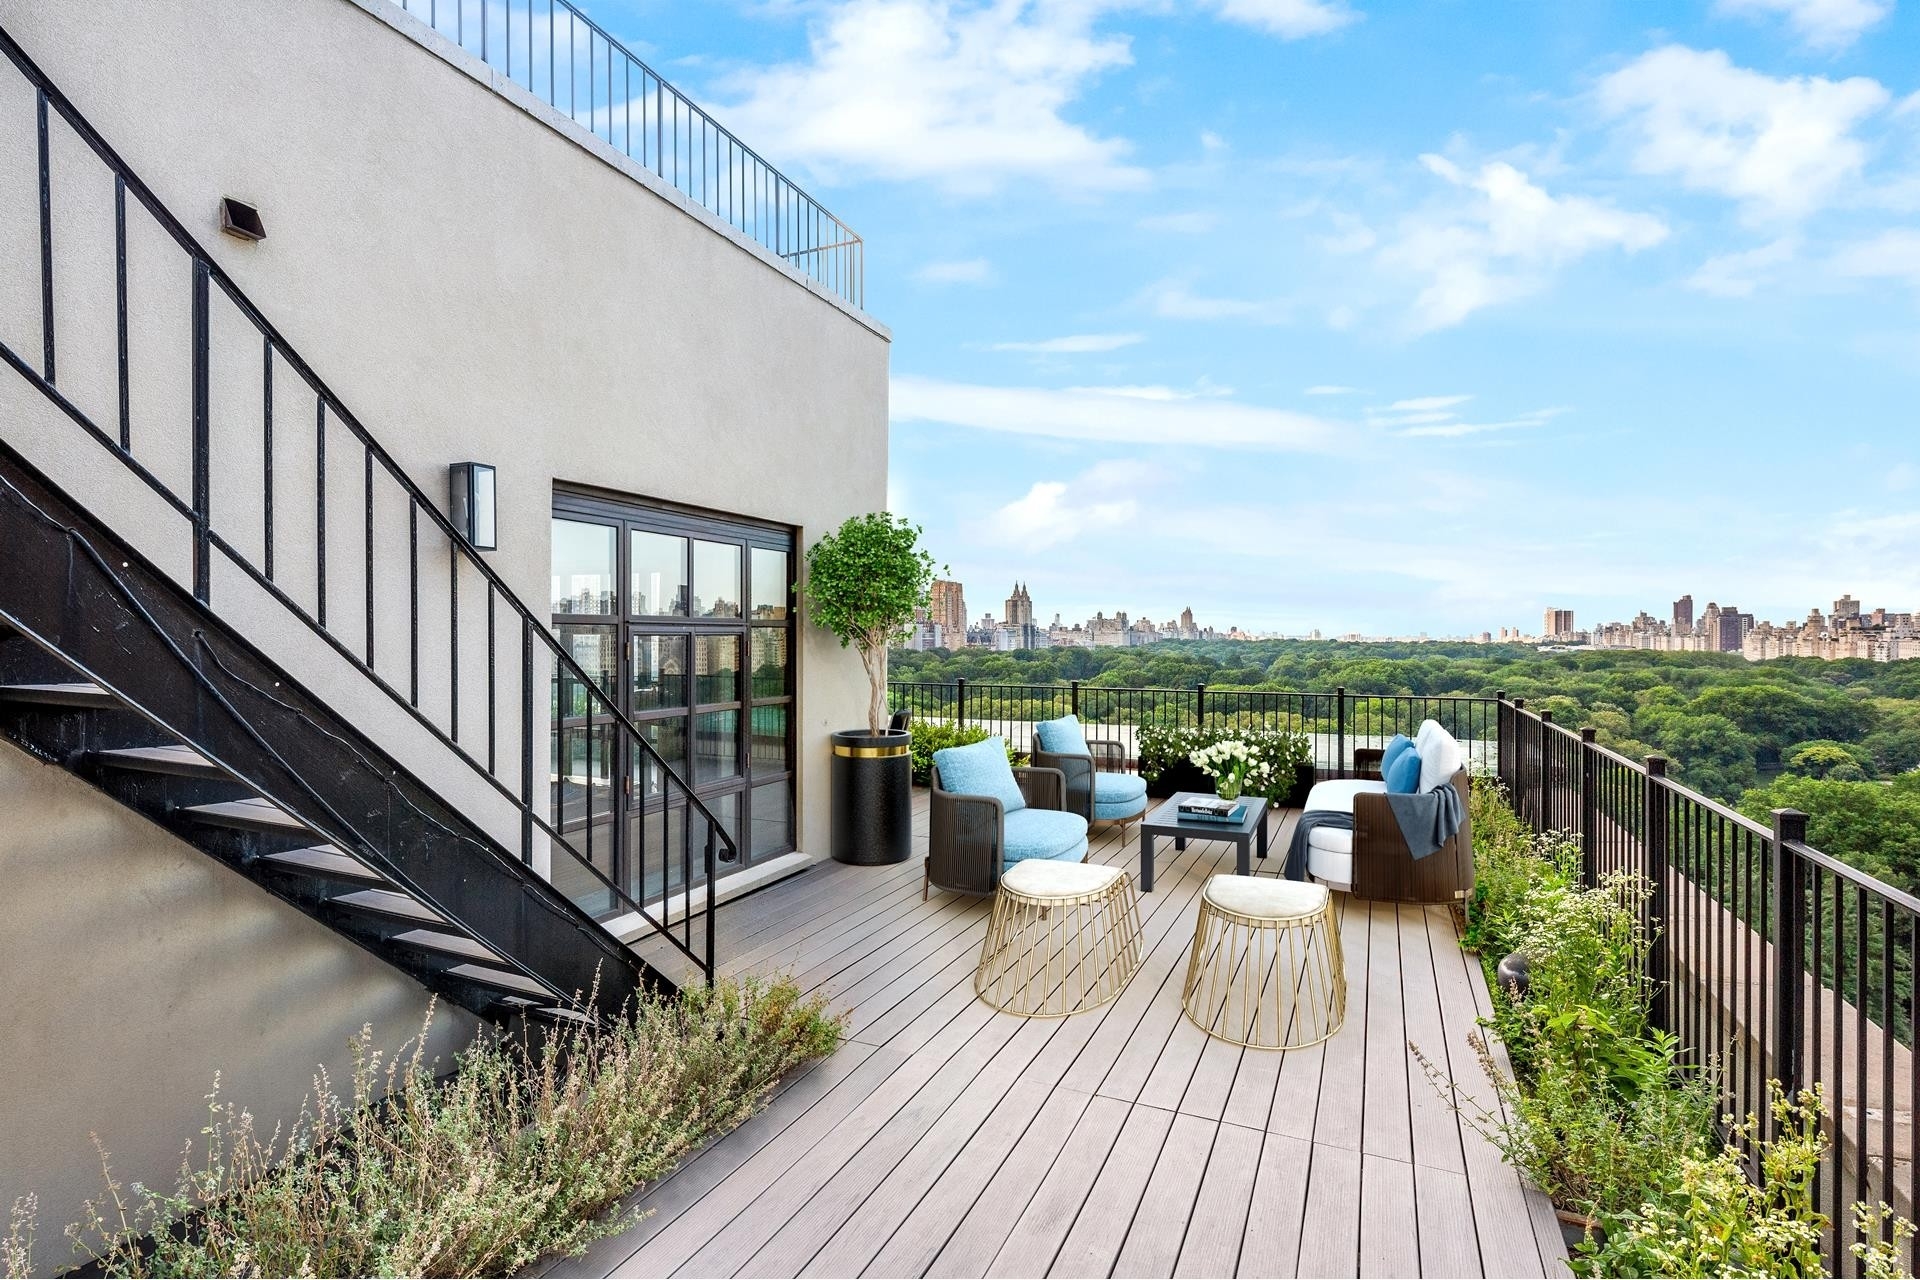 9. Co-op Properties for Sale at 128 CENTRAL PARK S, PH Central Park South, New York, New York 10019